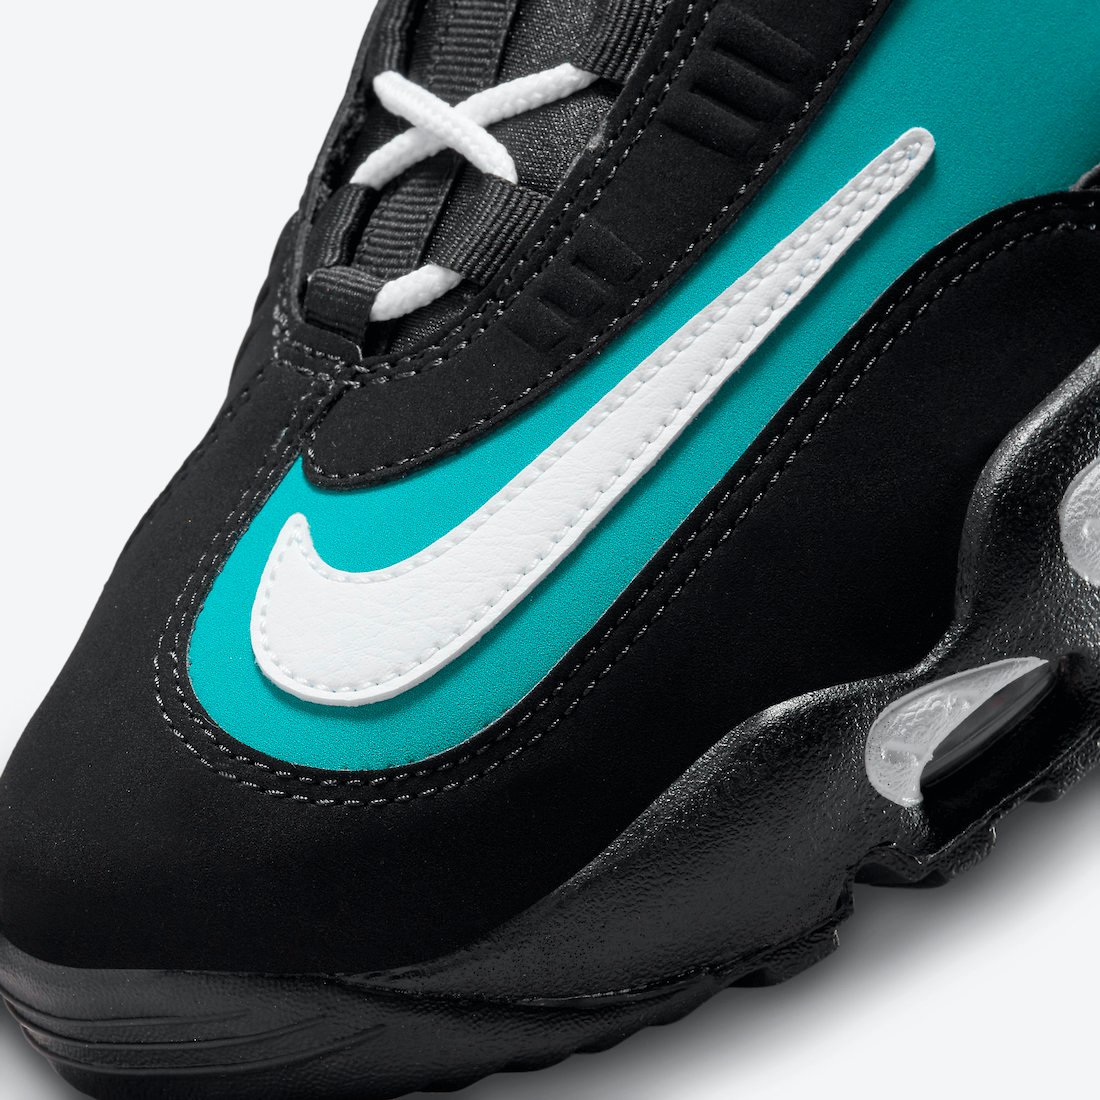 nike air griffey max 1 freshwater 2021 dm8311 001 release date info 7